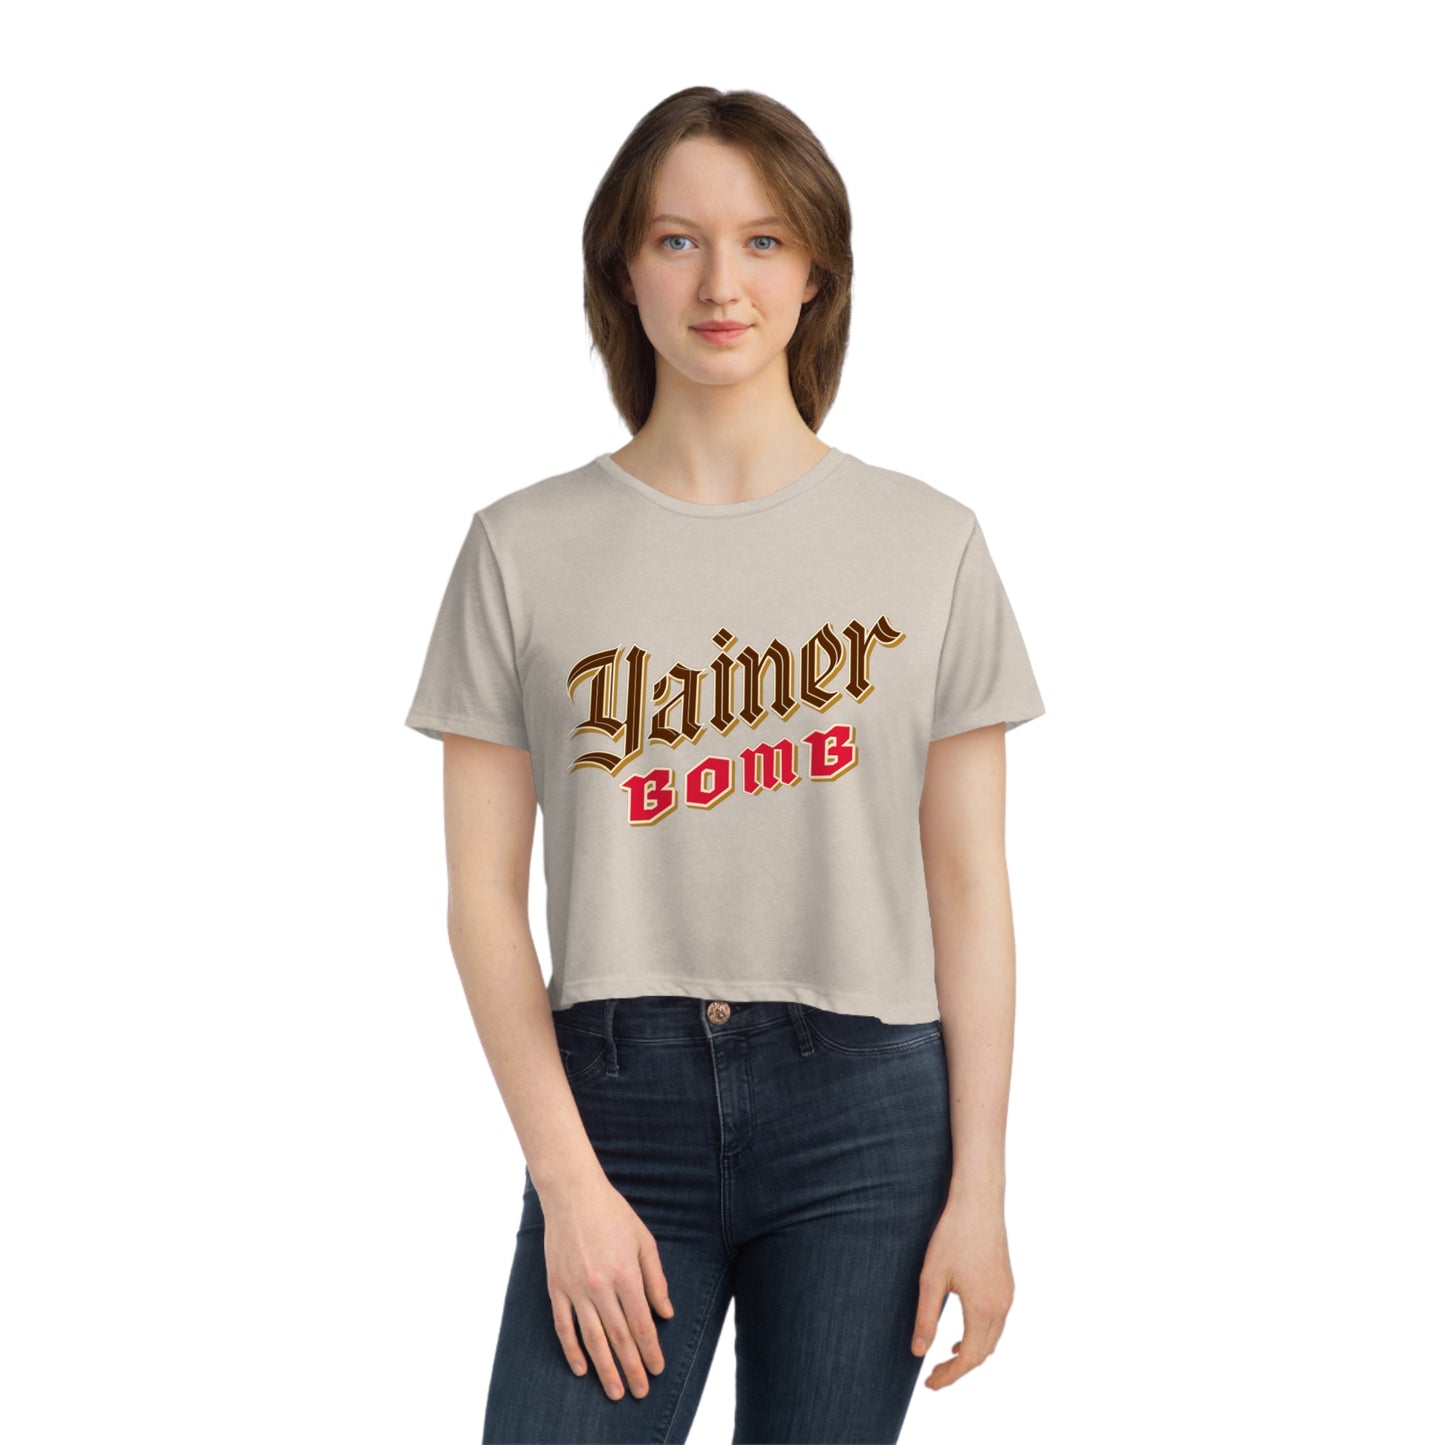 Yainer Bomb Cropped Tee